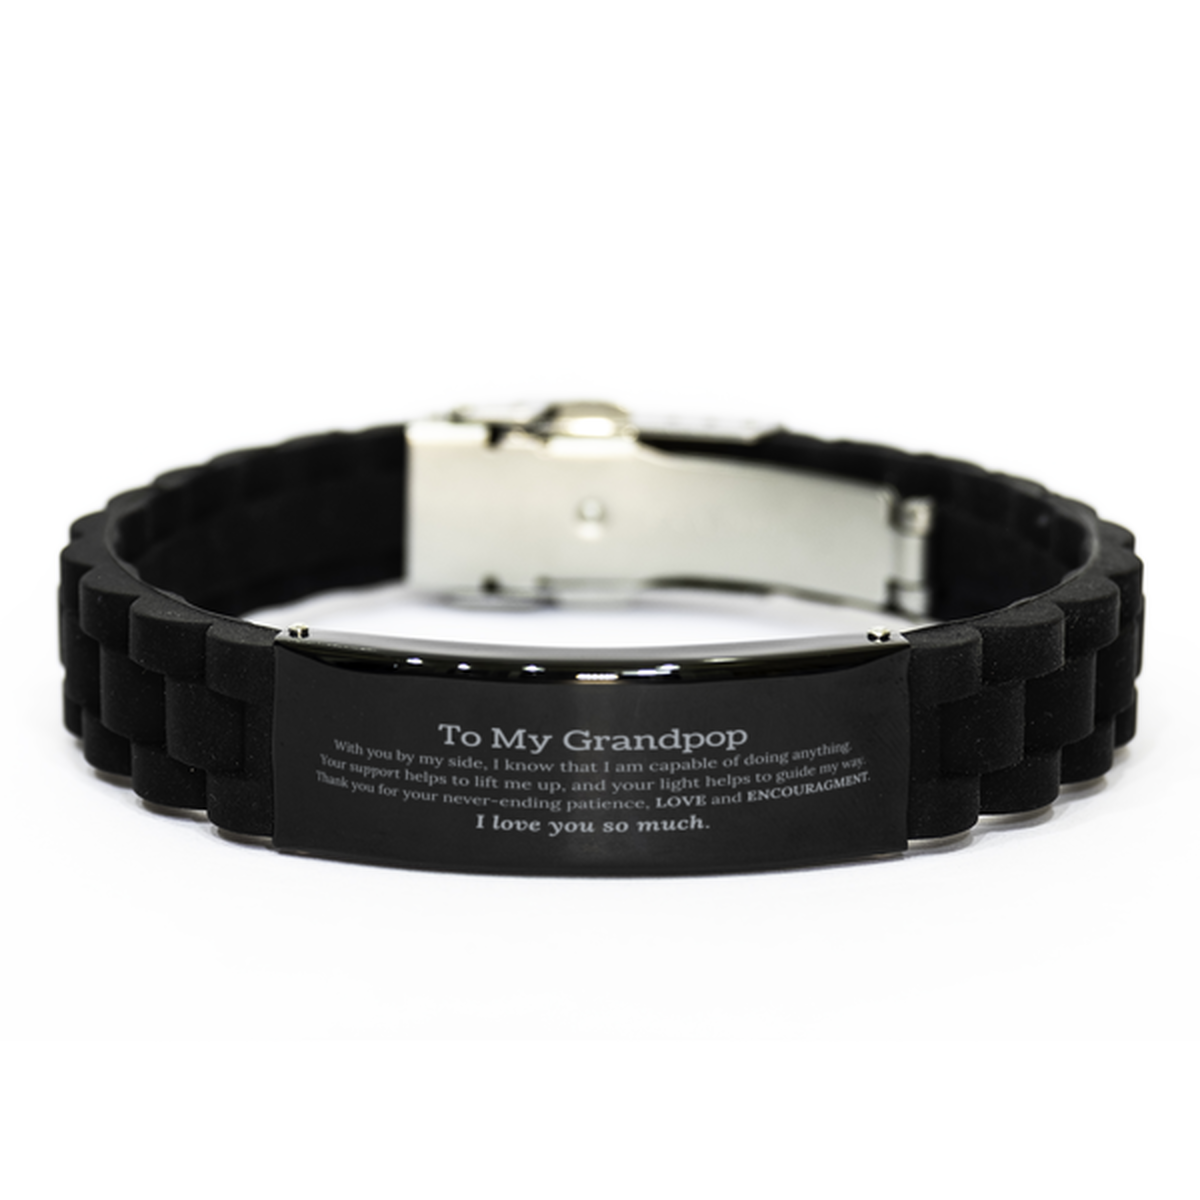 Appreciation Grandpop Black Glidelock Clasp Bracelet Gifts, To My Grandpop Birthday Christmas Wedding Keepsake Gifts for Grandpop With you by my side, I know that I am capable of doing anything. I love you so much